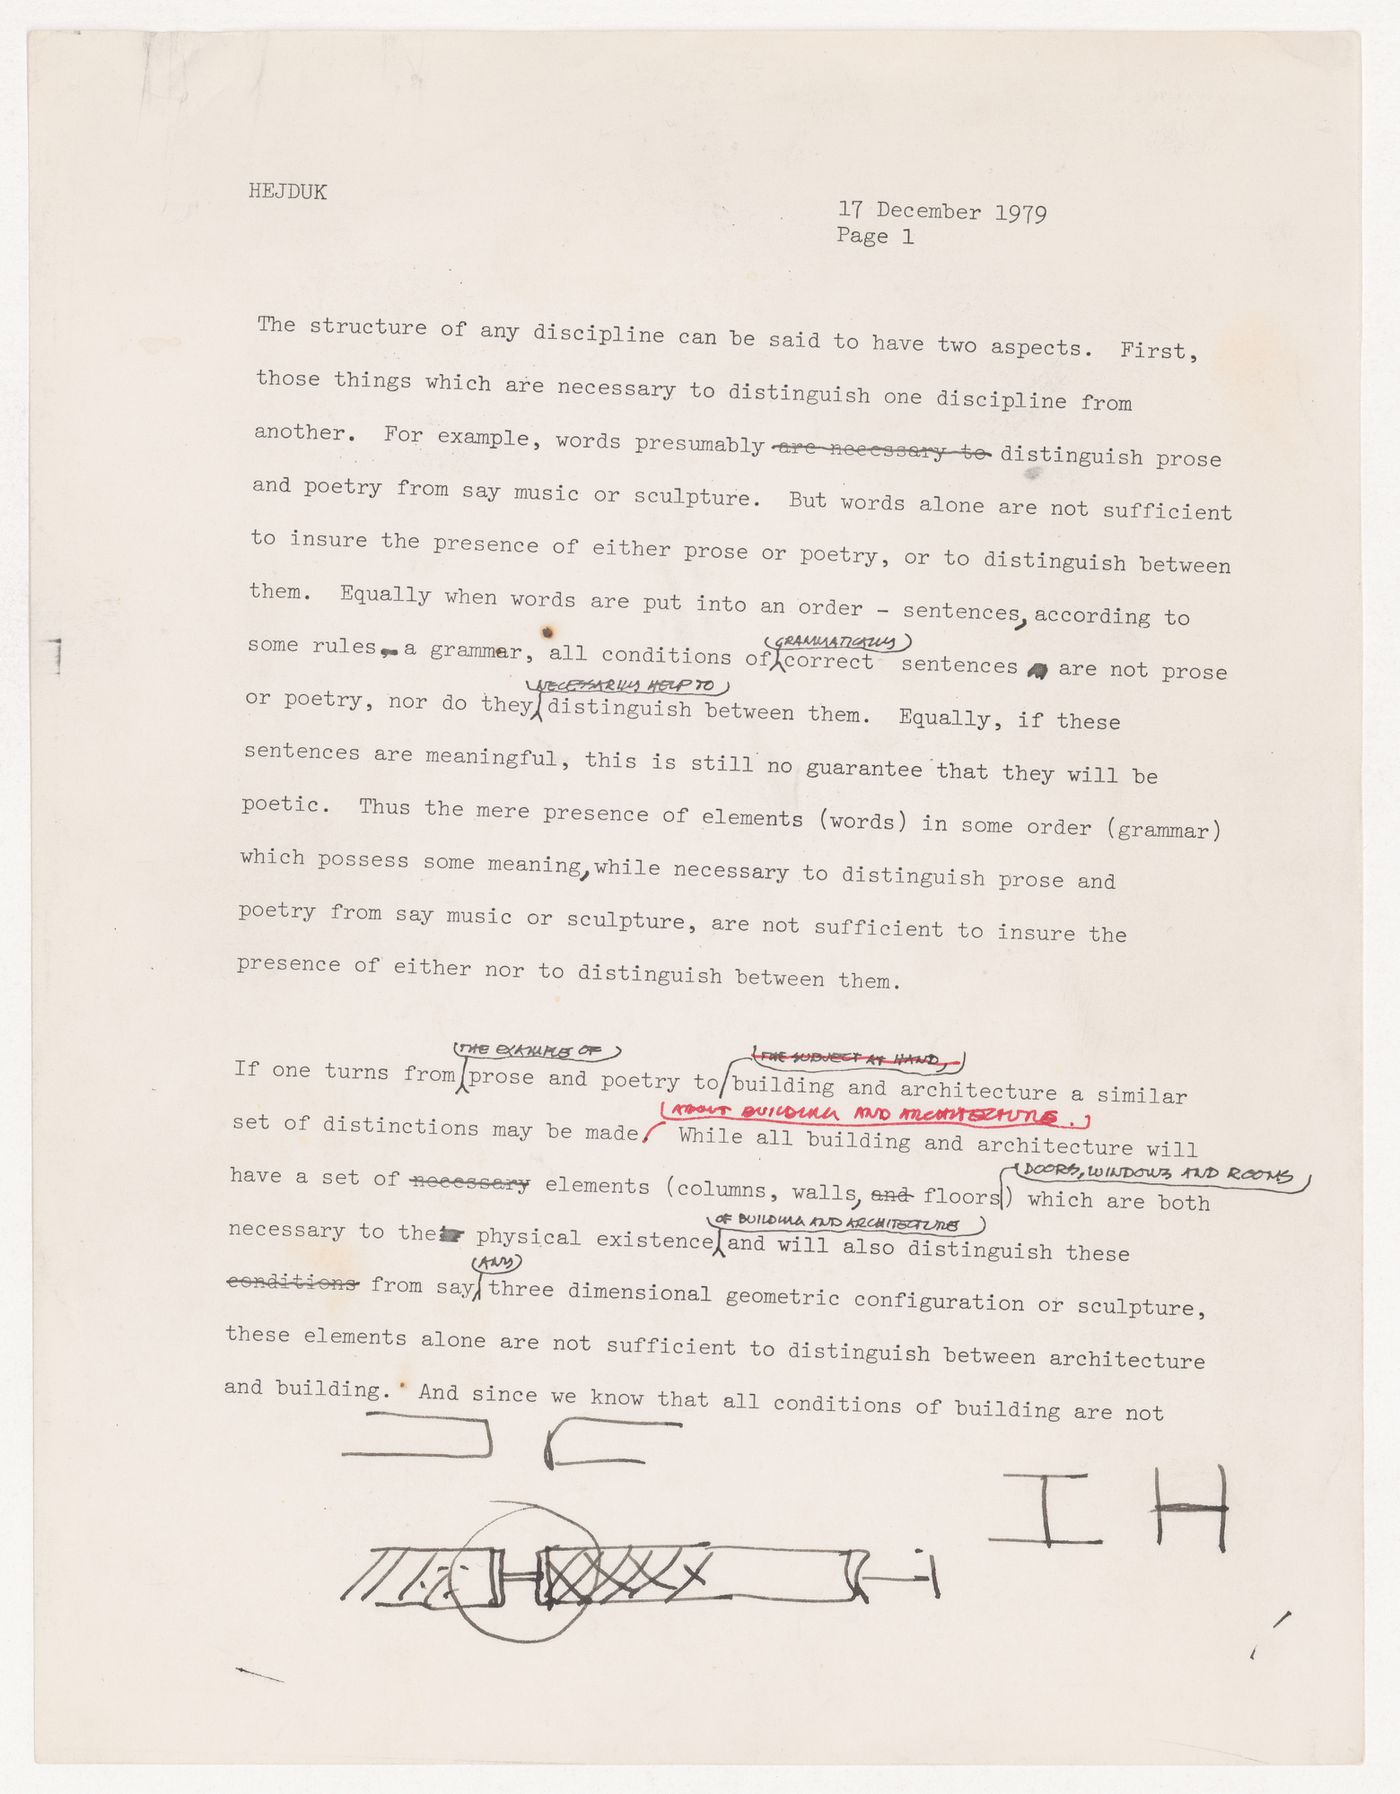 Draft essay with corrections and annotations by John Hejduk (from the project file Exhibition Catalogues)